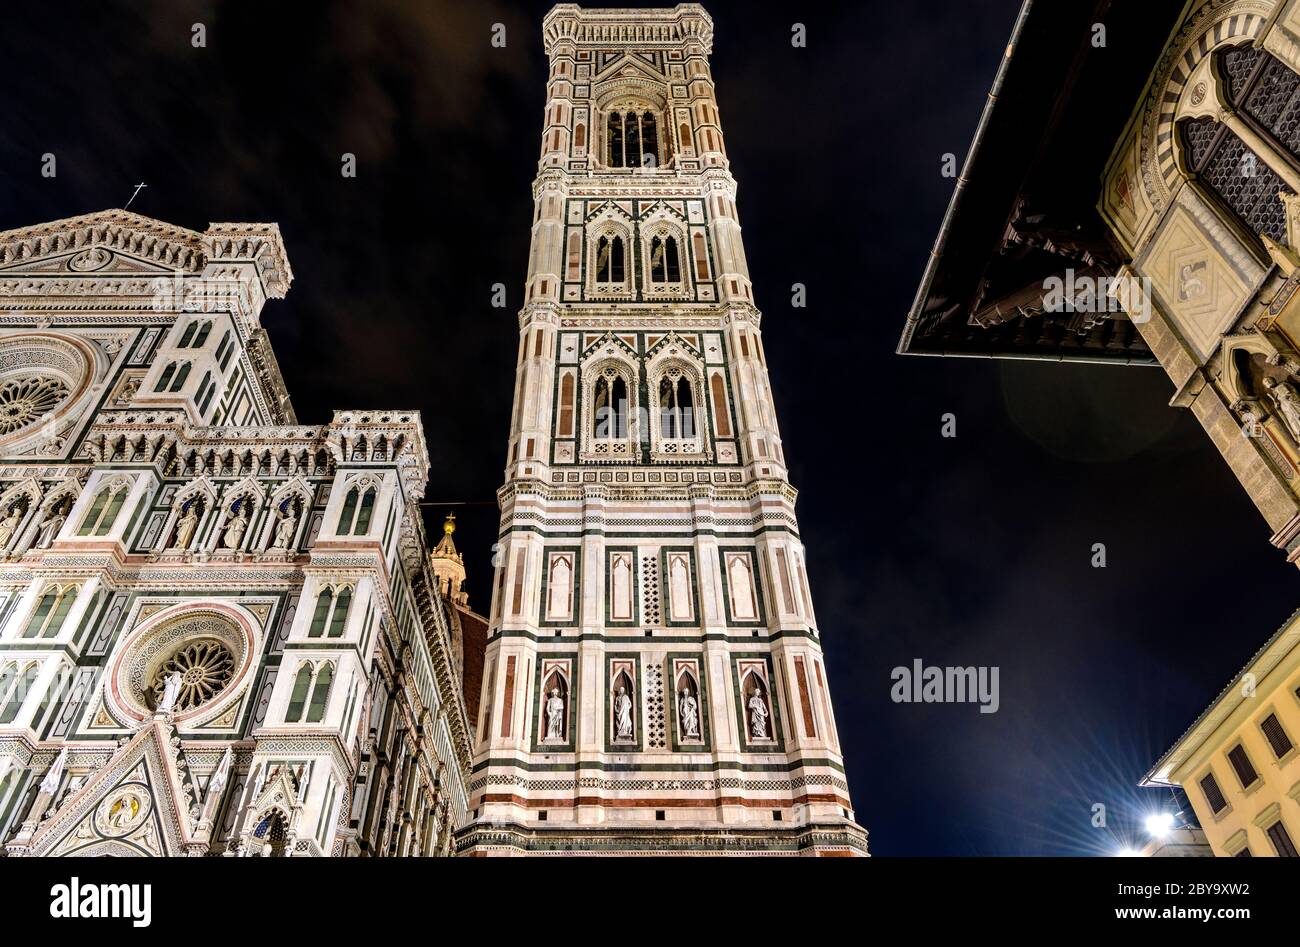 Giotto's Campanile at Night - A low-angle night view of Giotto's Campanile of the Florence Cathedral. Florence, Tuscany, Italy. Stock Photo